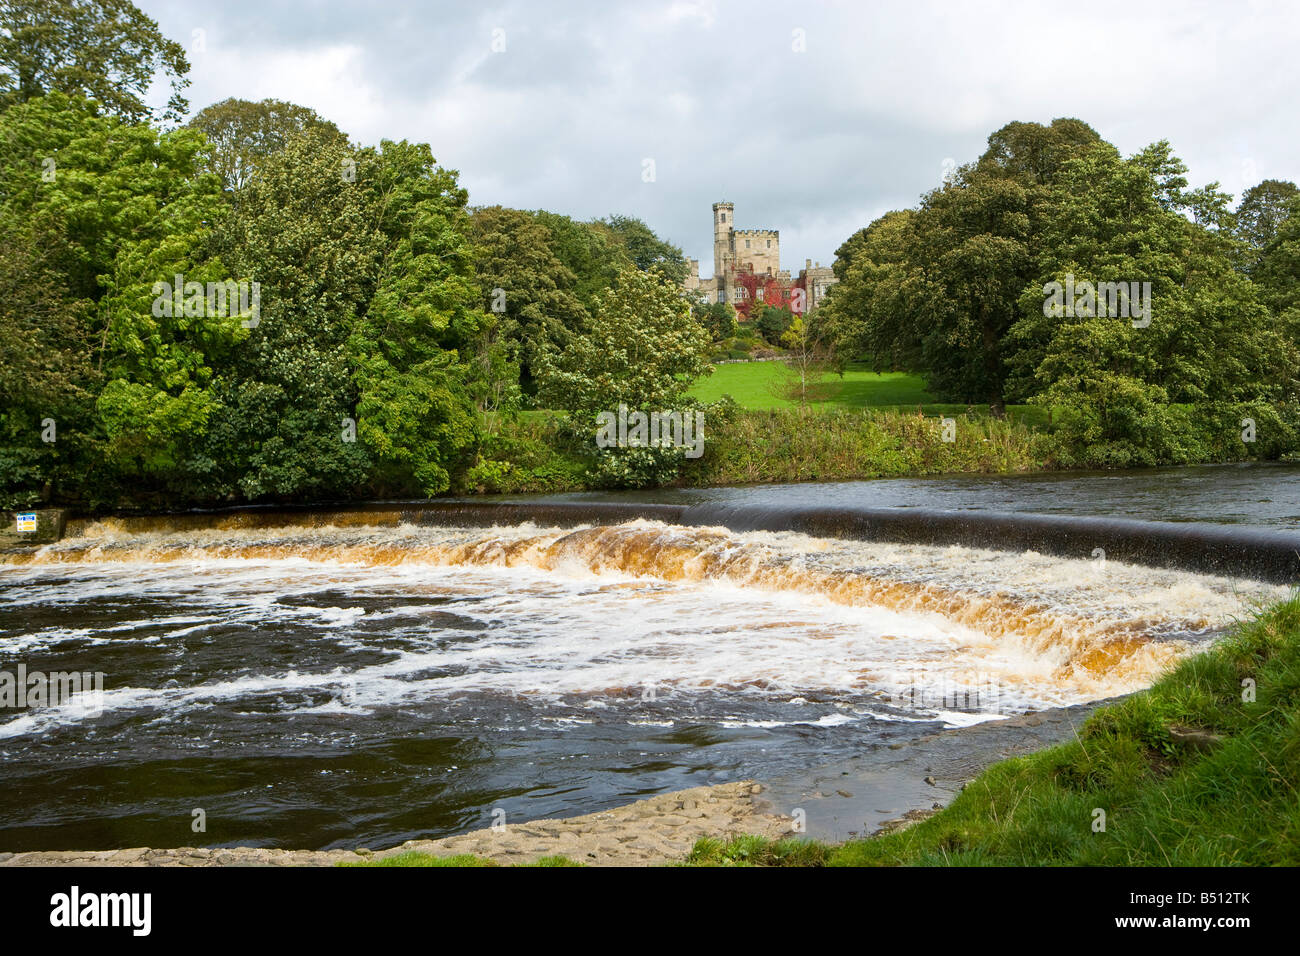 The private castle at Hornby in Lancashire with River Hodder in the foreground Stock Photo